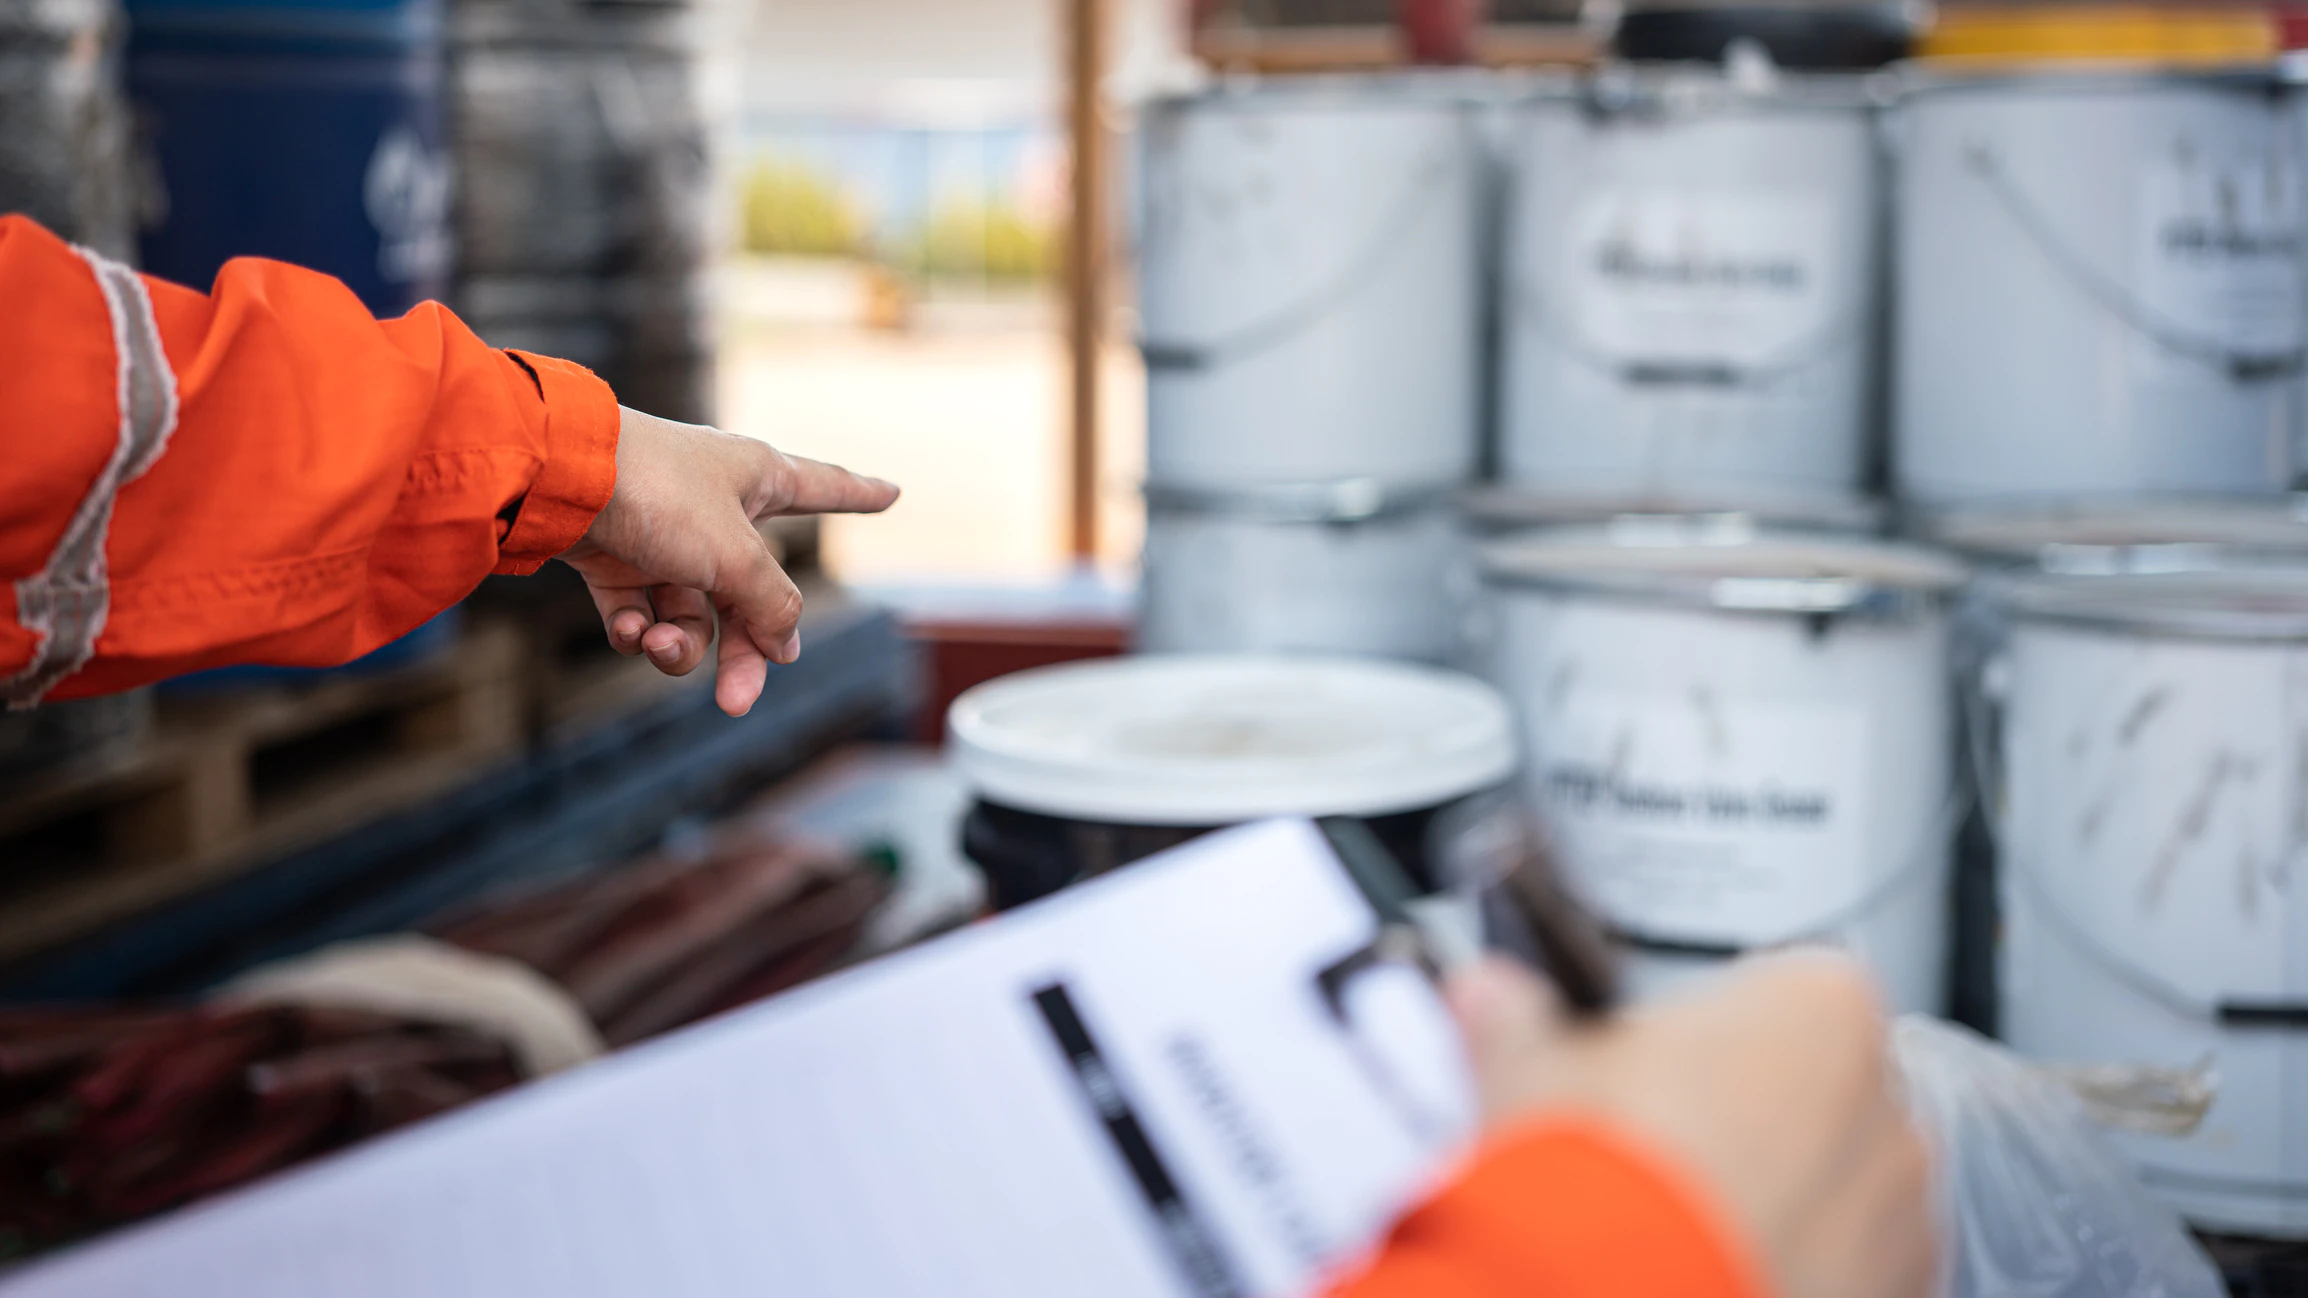 Four Approaches for the Chemical Sector to Manage Inventory, Cut Costs, and Augment Value